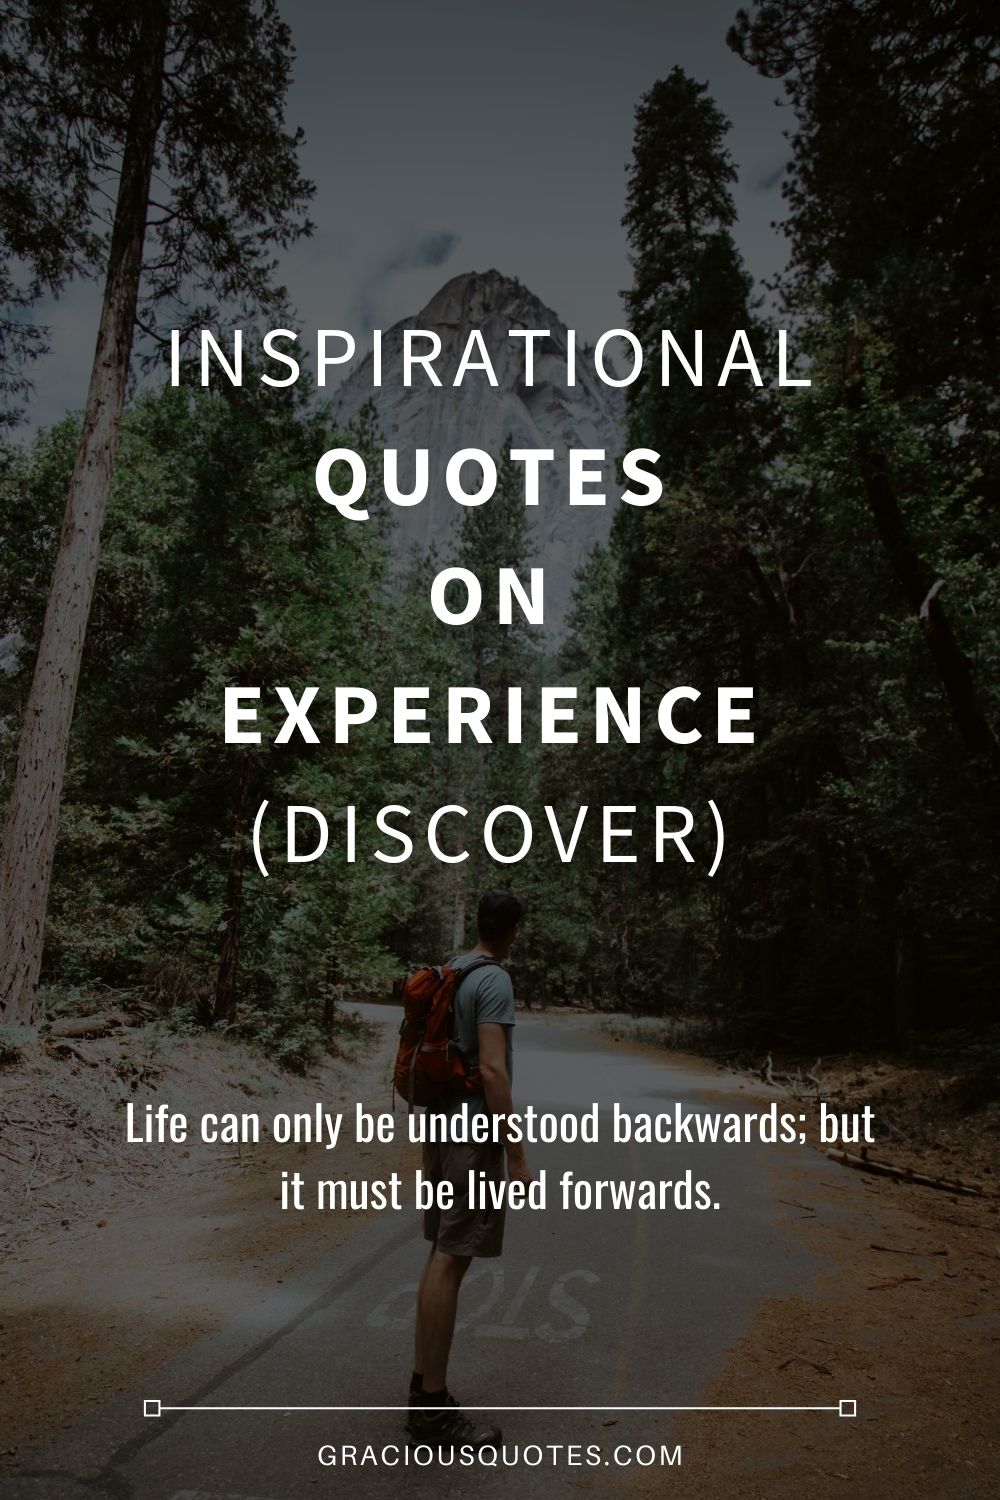 Inspirational Quotes on Experience (DISCOVER) - Gracious Quotes